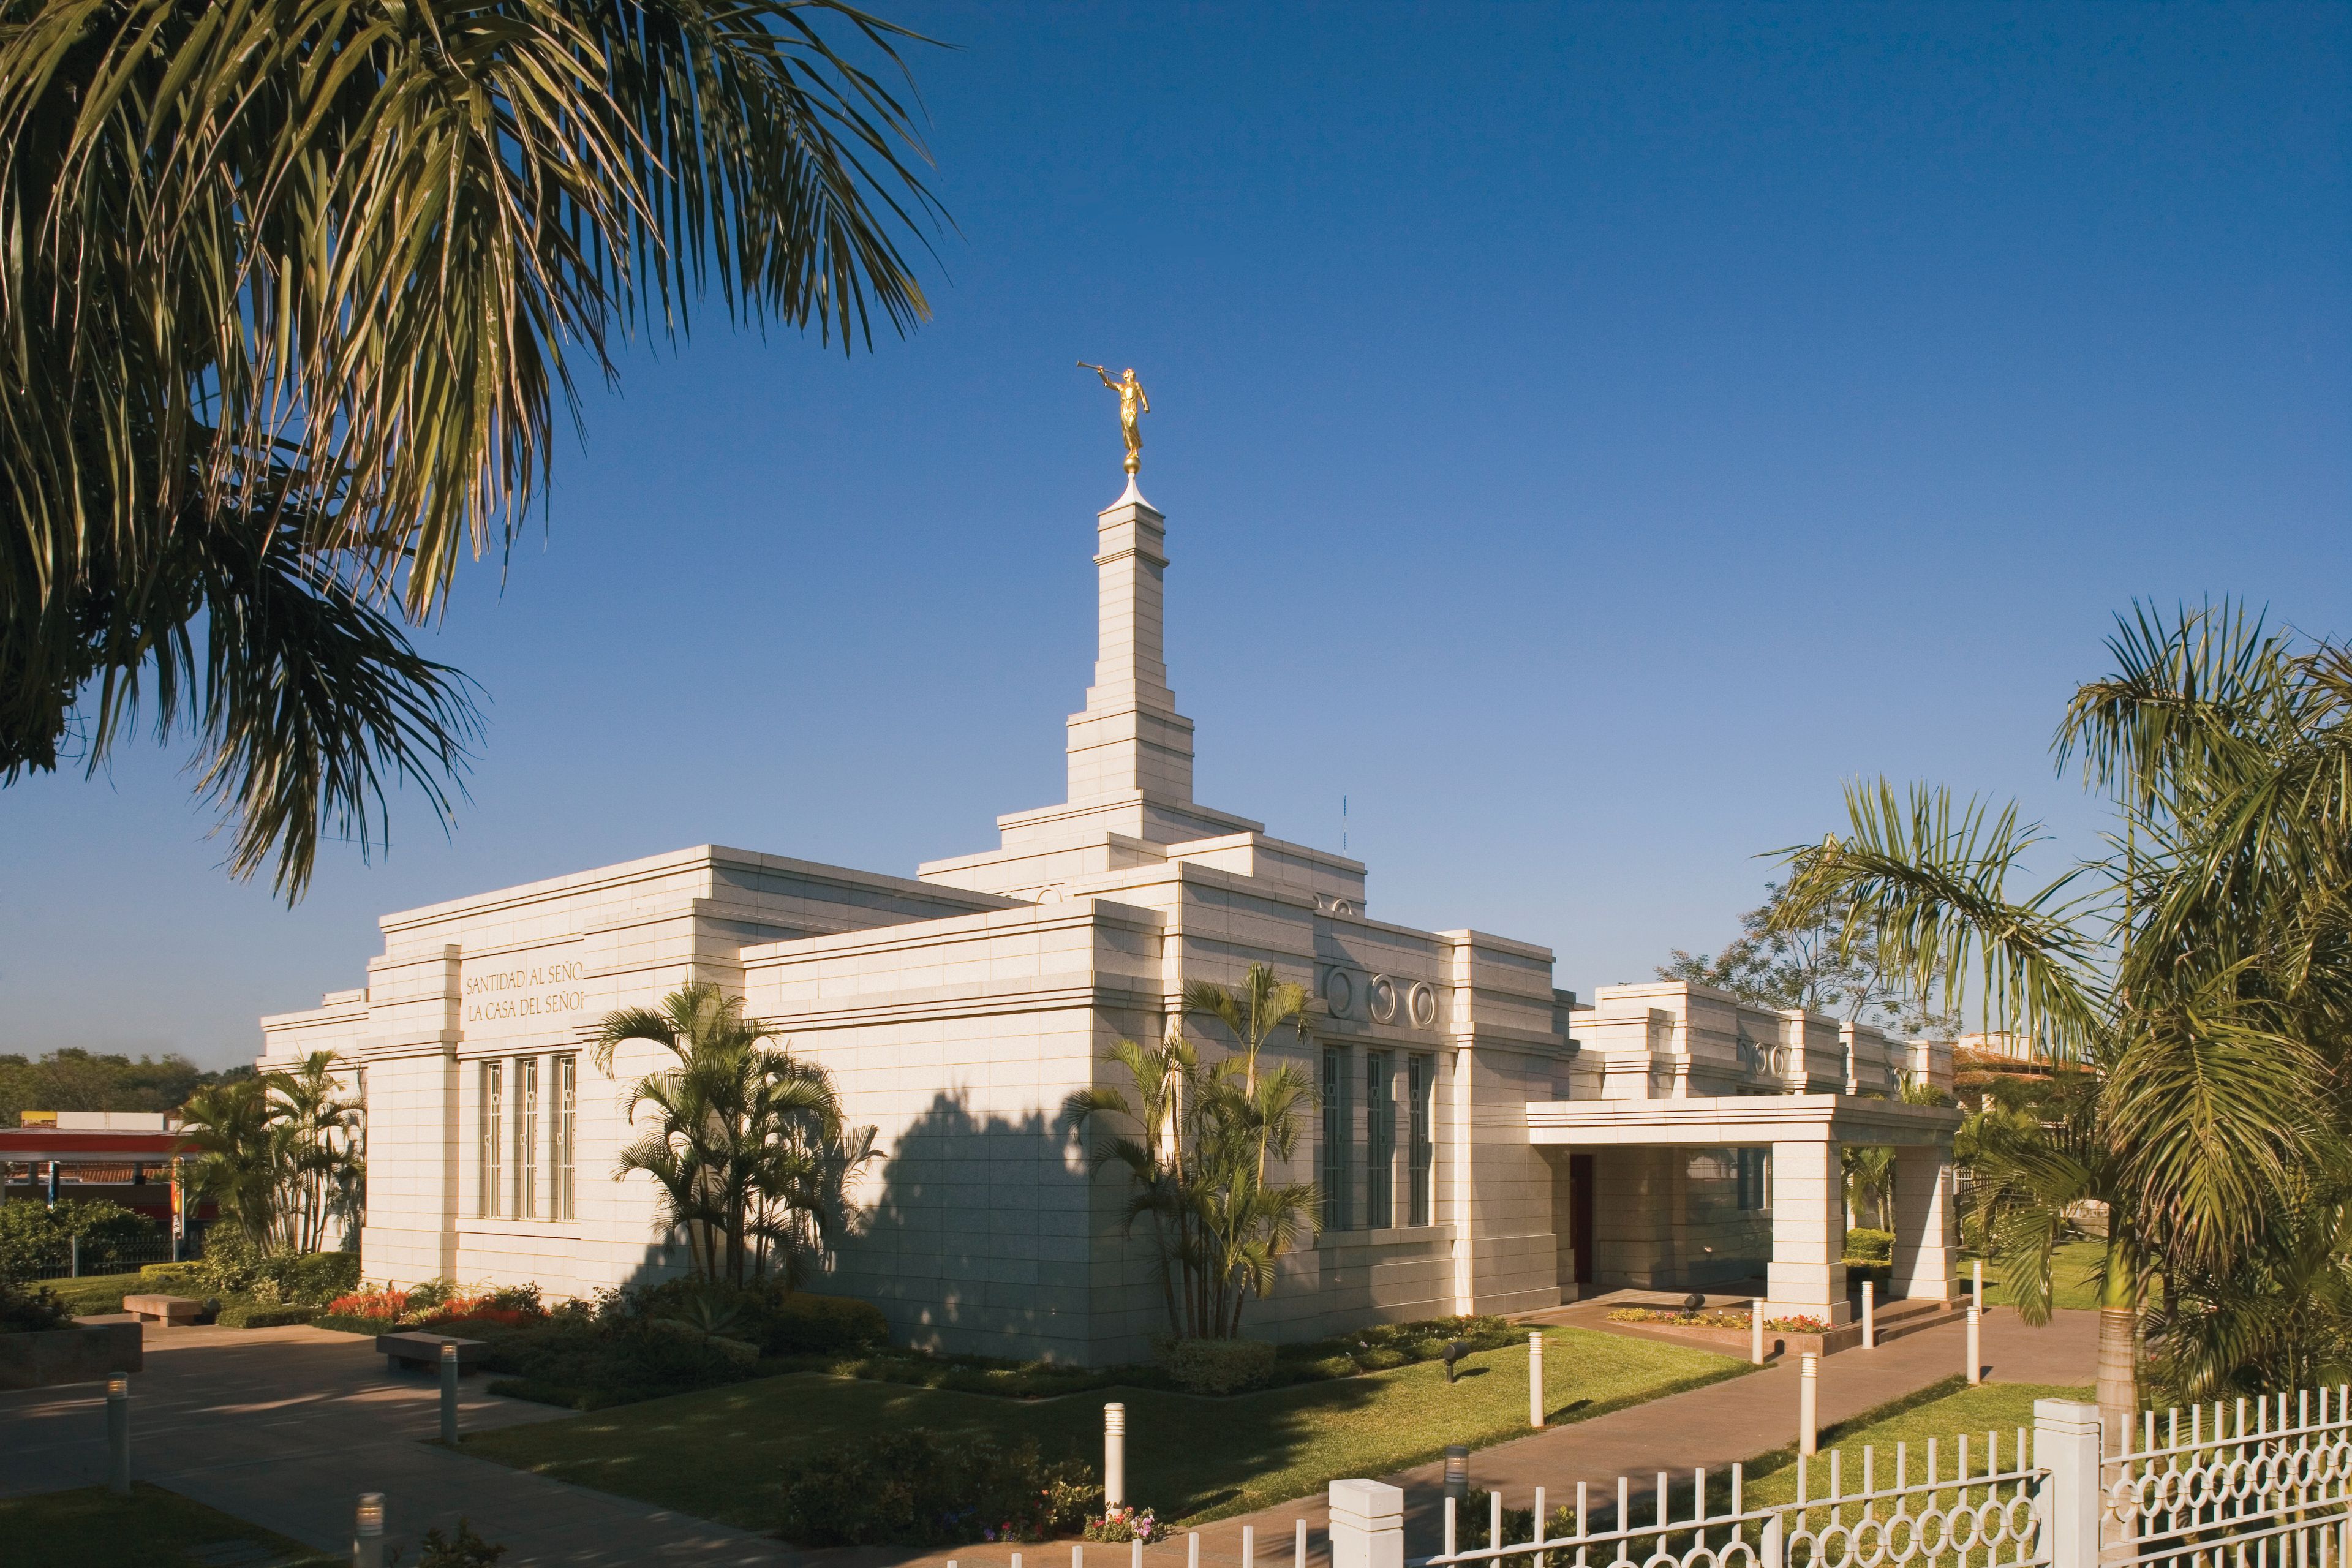 Palm trees frame a view of the Asunción Paraguay Temple.